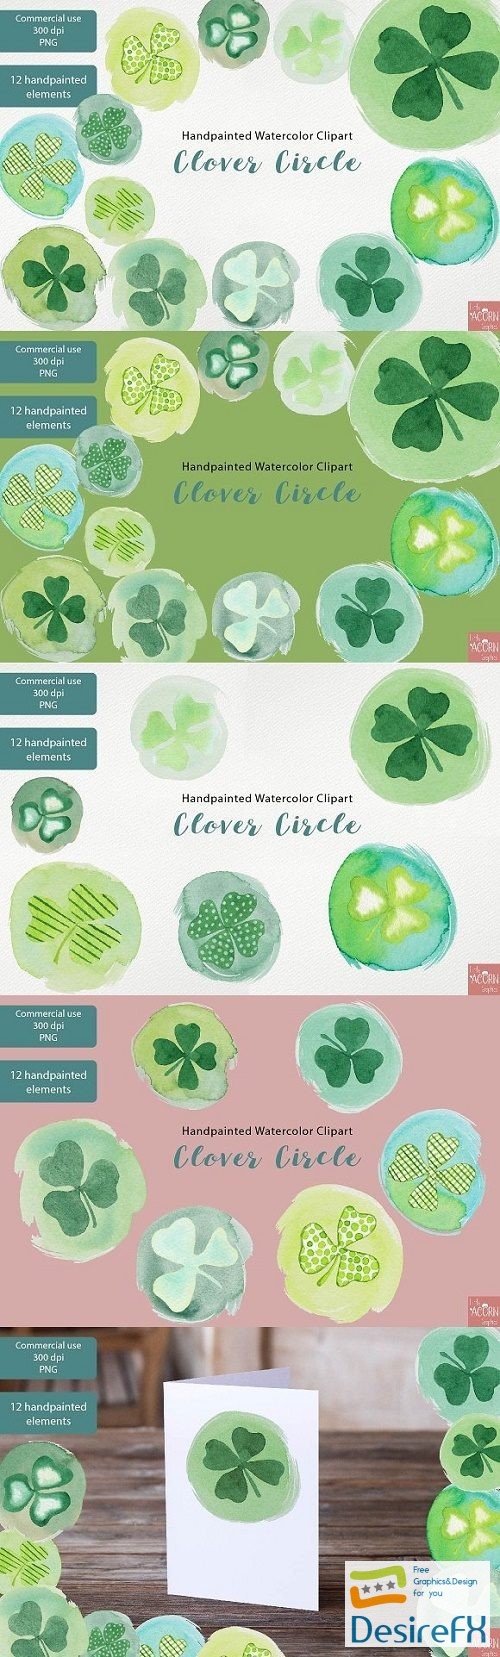 Watercolor Clipart St Patricks Day - 2321627